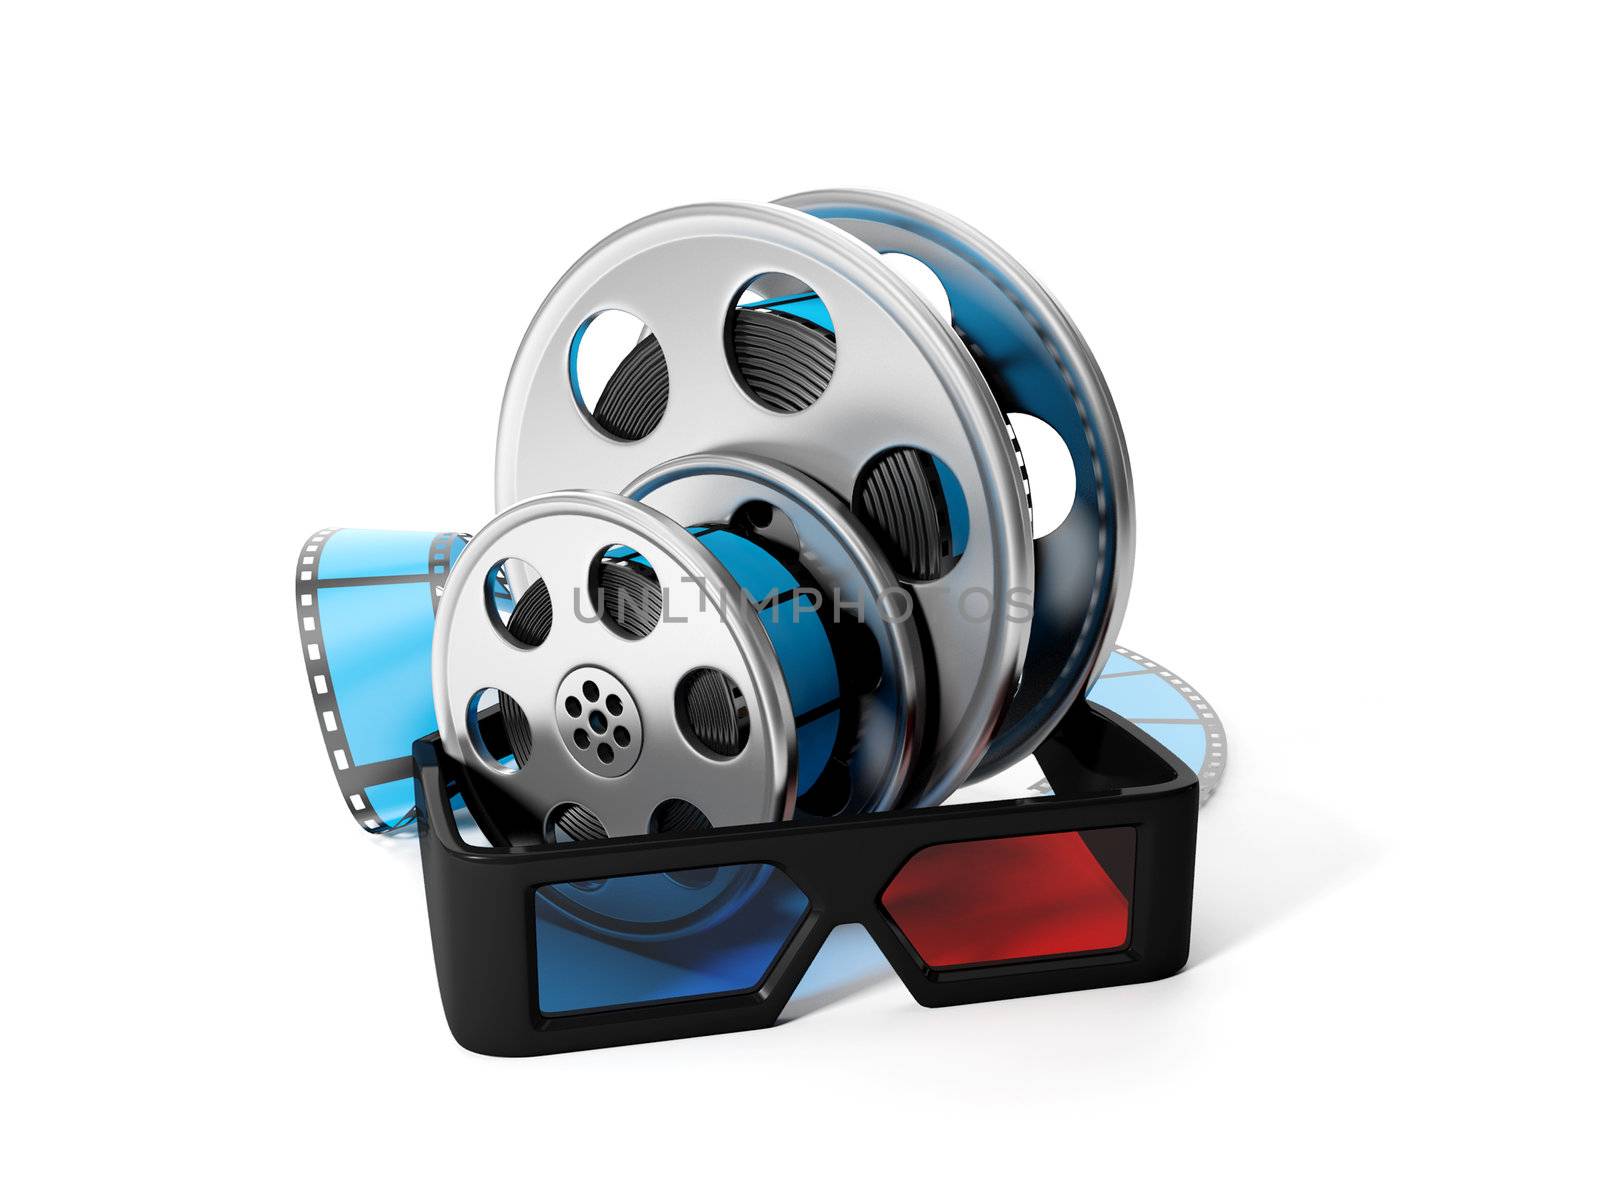 3d illustration: Reels of film and 3D glasses. Isolated image by kolobsek